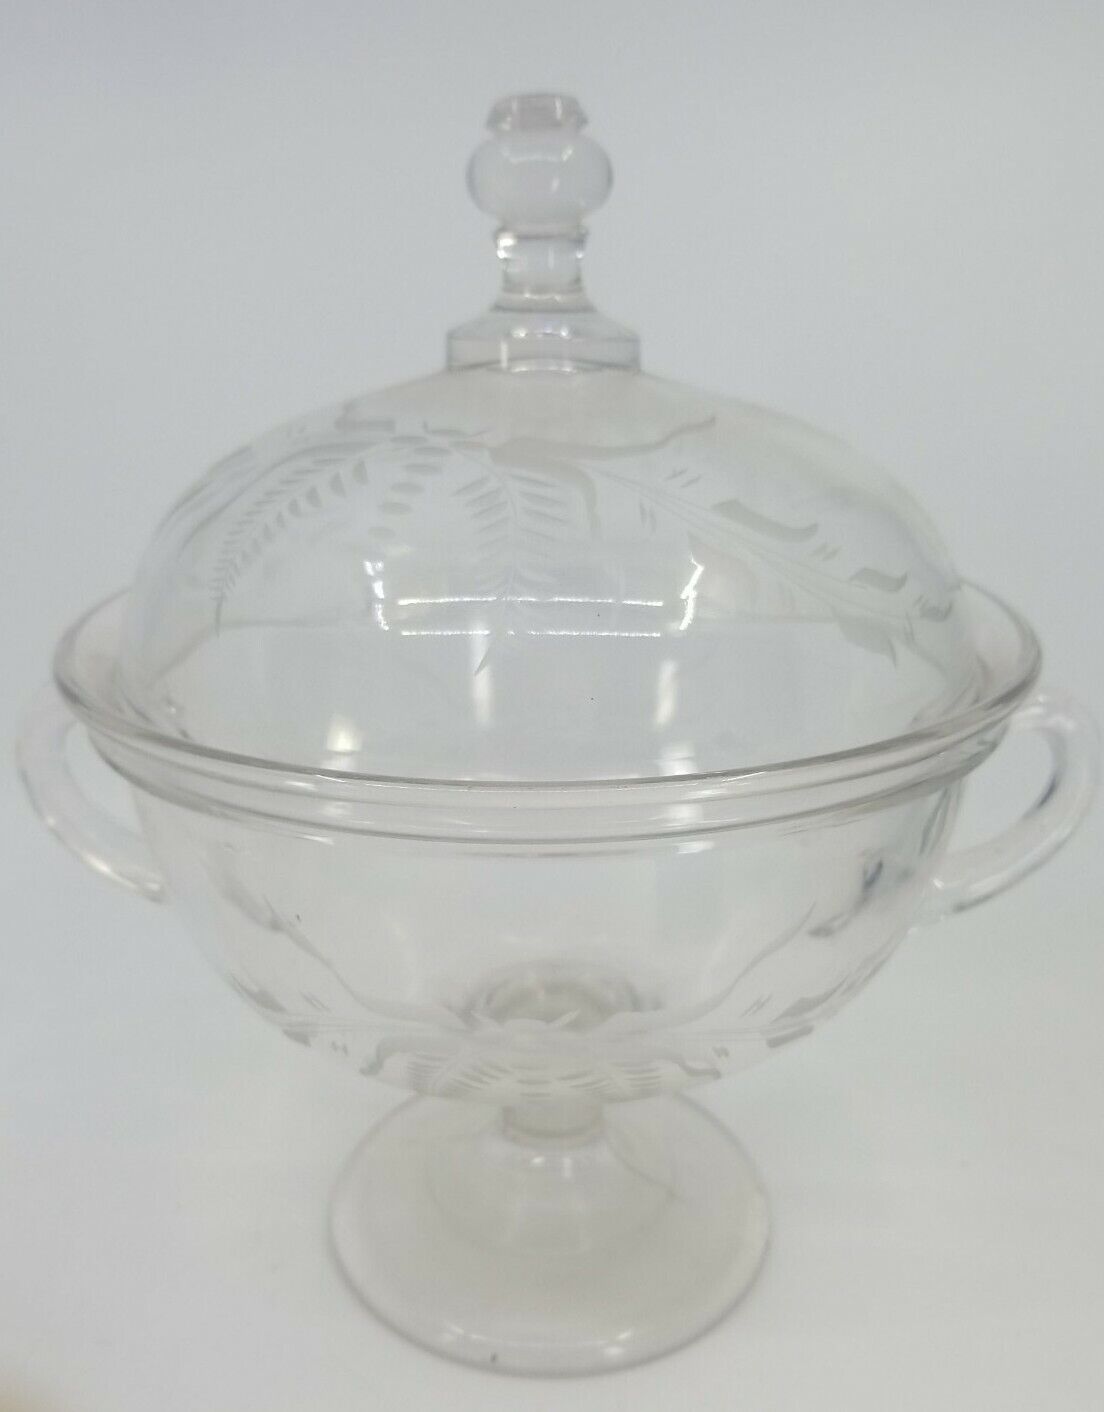 Vintage Early American 19th Century Pattern Glass Lidded Candy Bowl